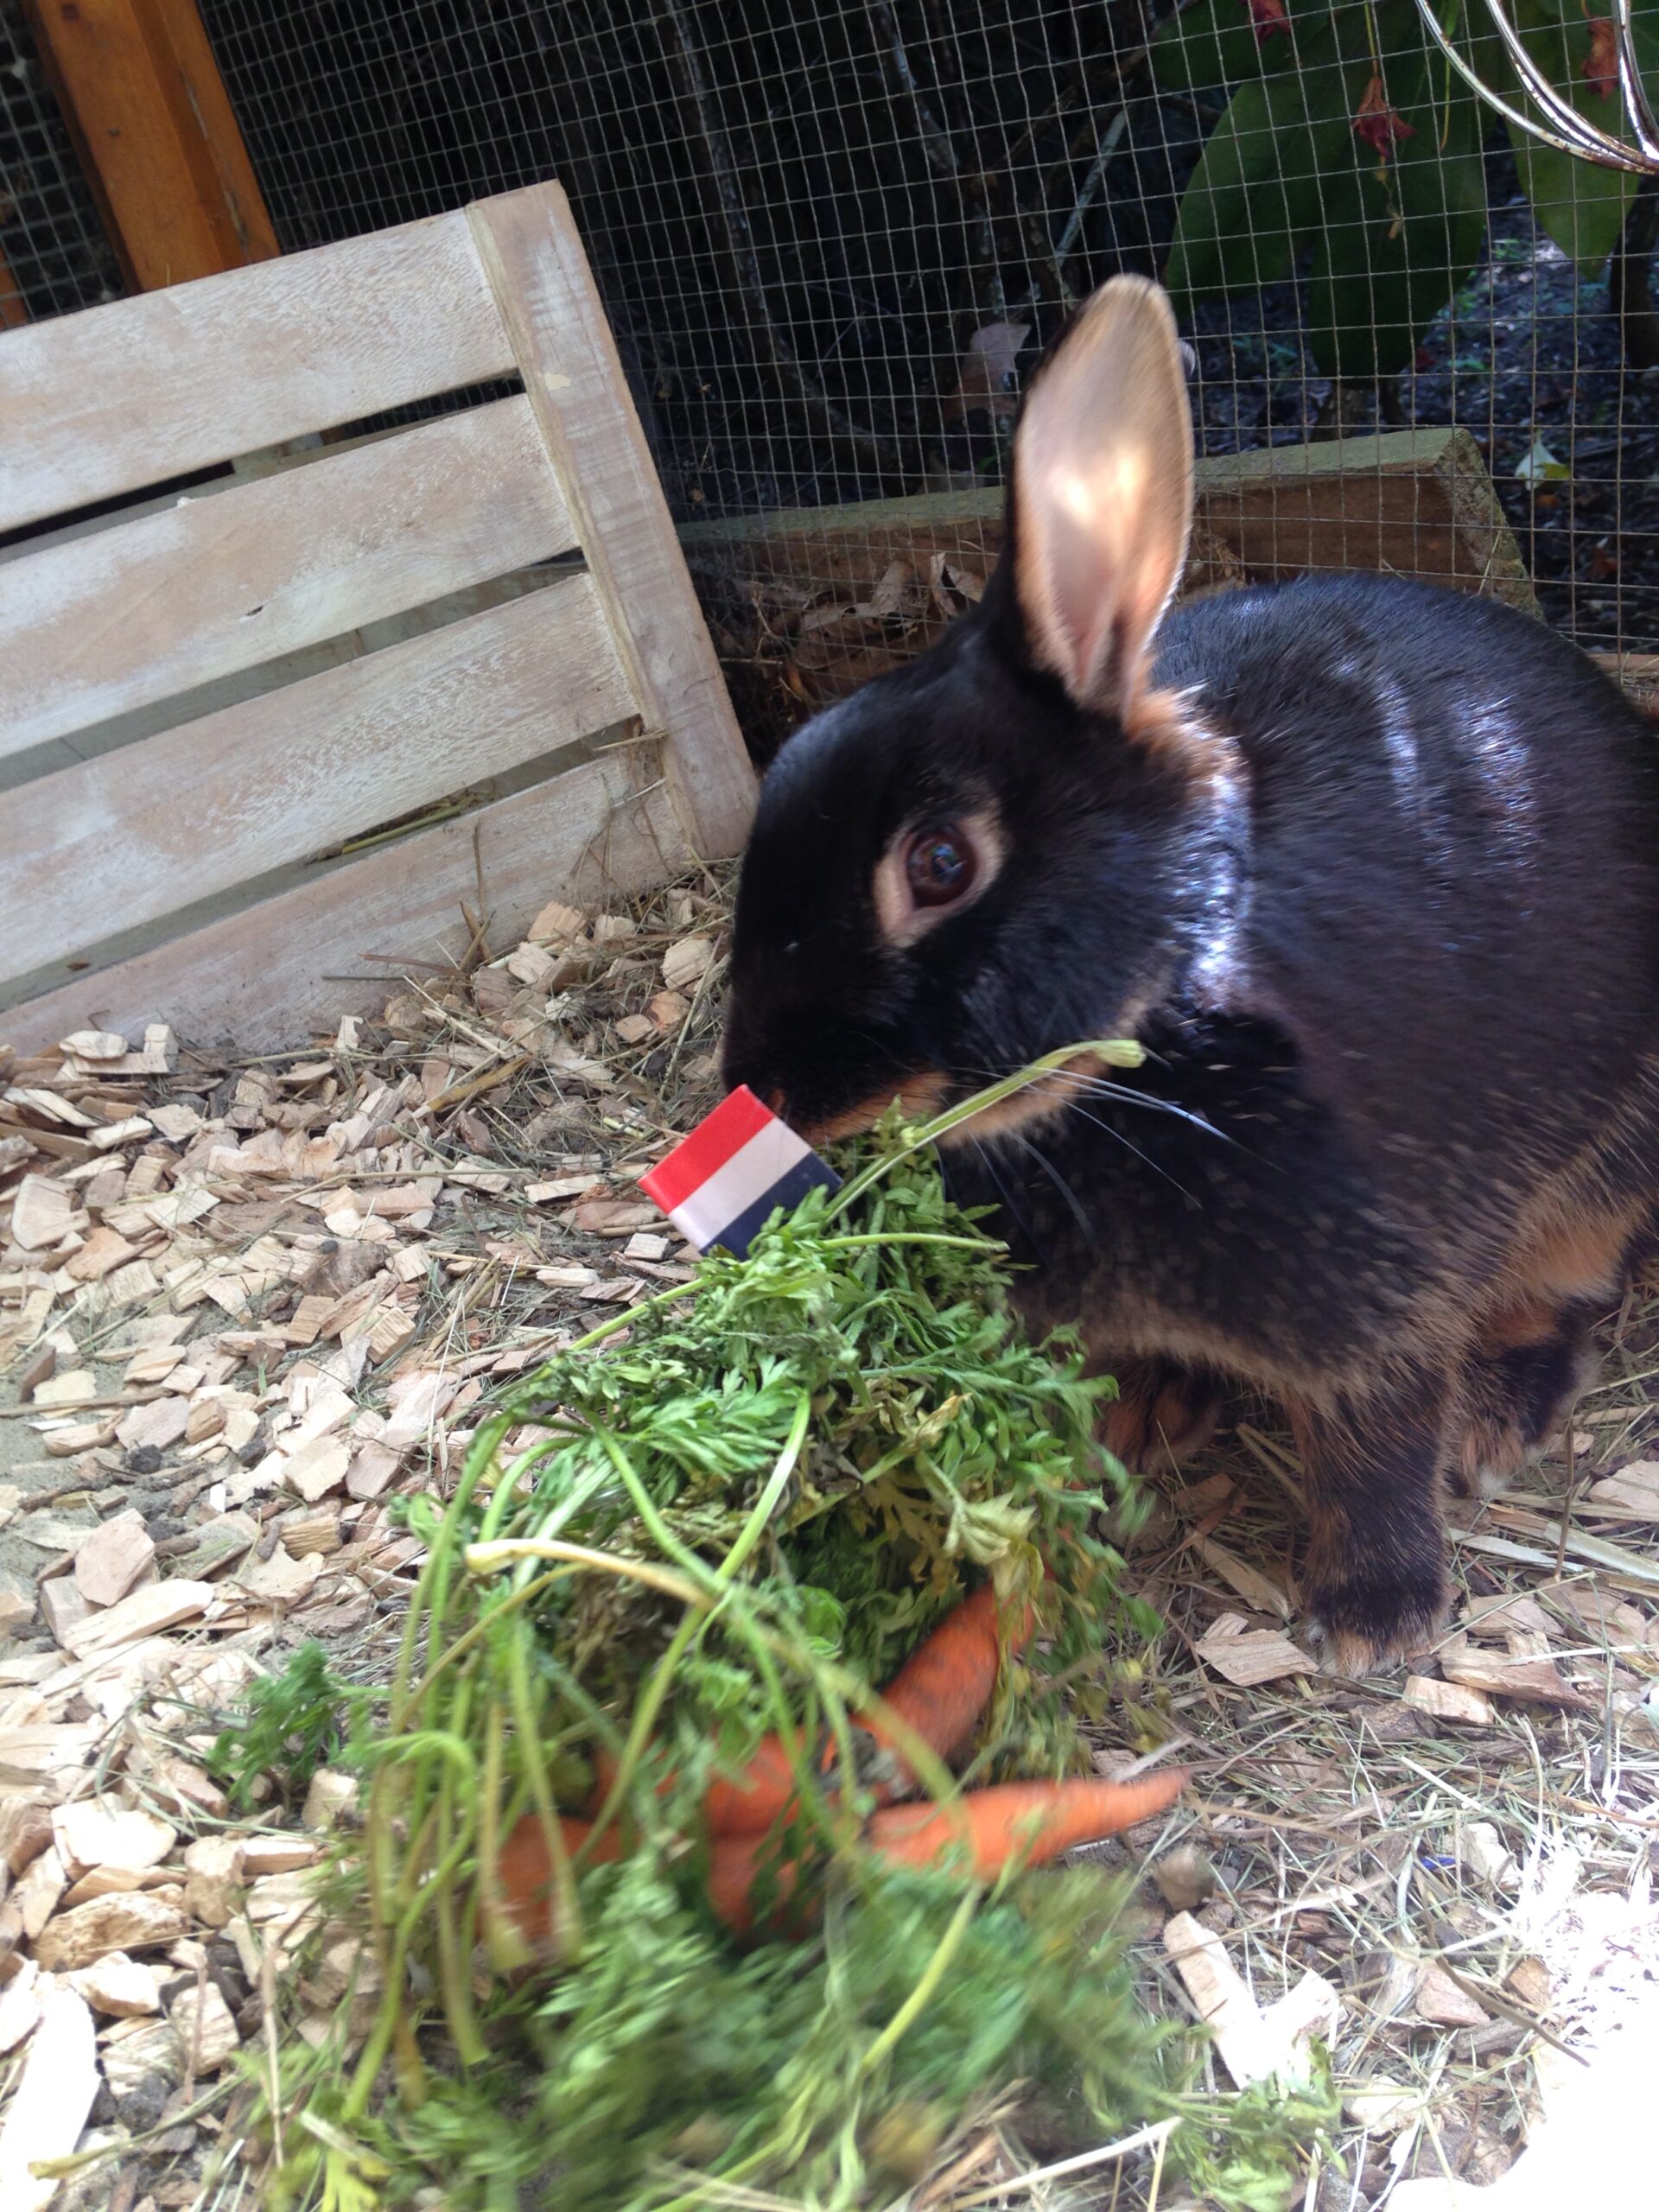 WC2014: Chili against the Netherlands – Nora the rabbit predicts …